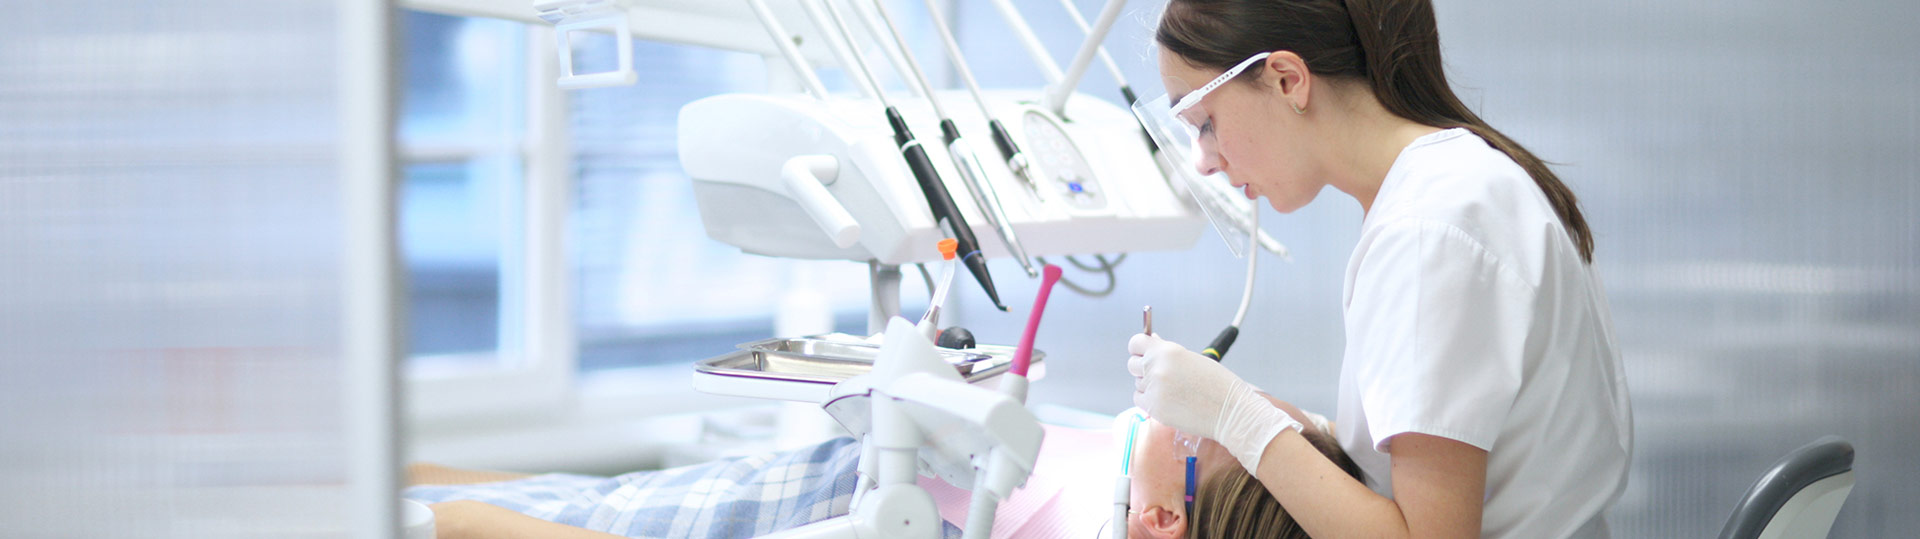 Clinical Evaluation of Dental Diagnostic and Therapeutic Devices - Celegence - Case Study